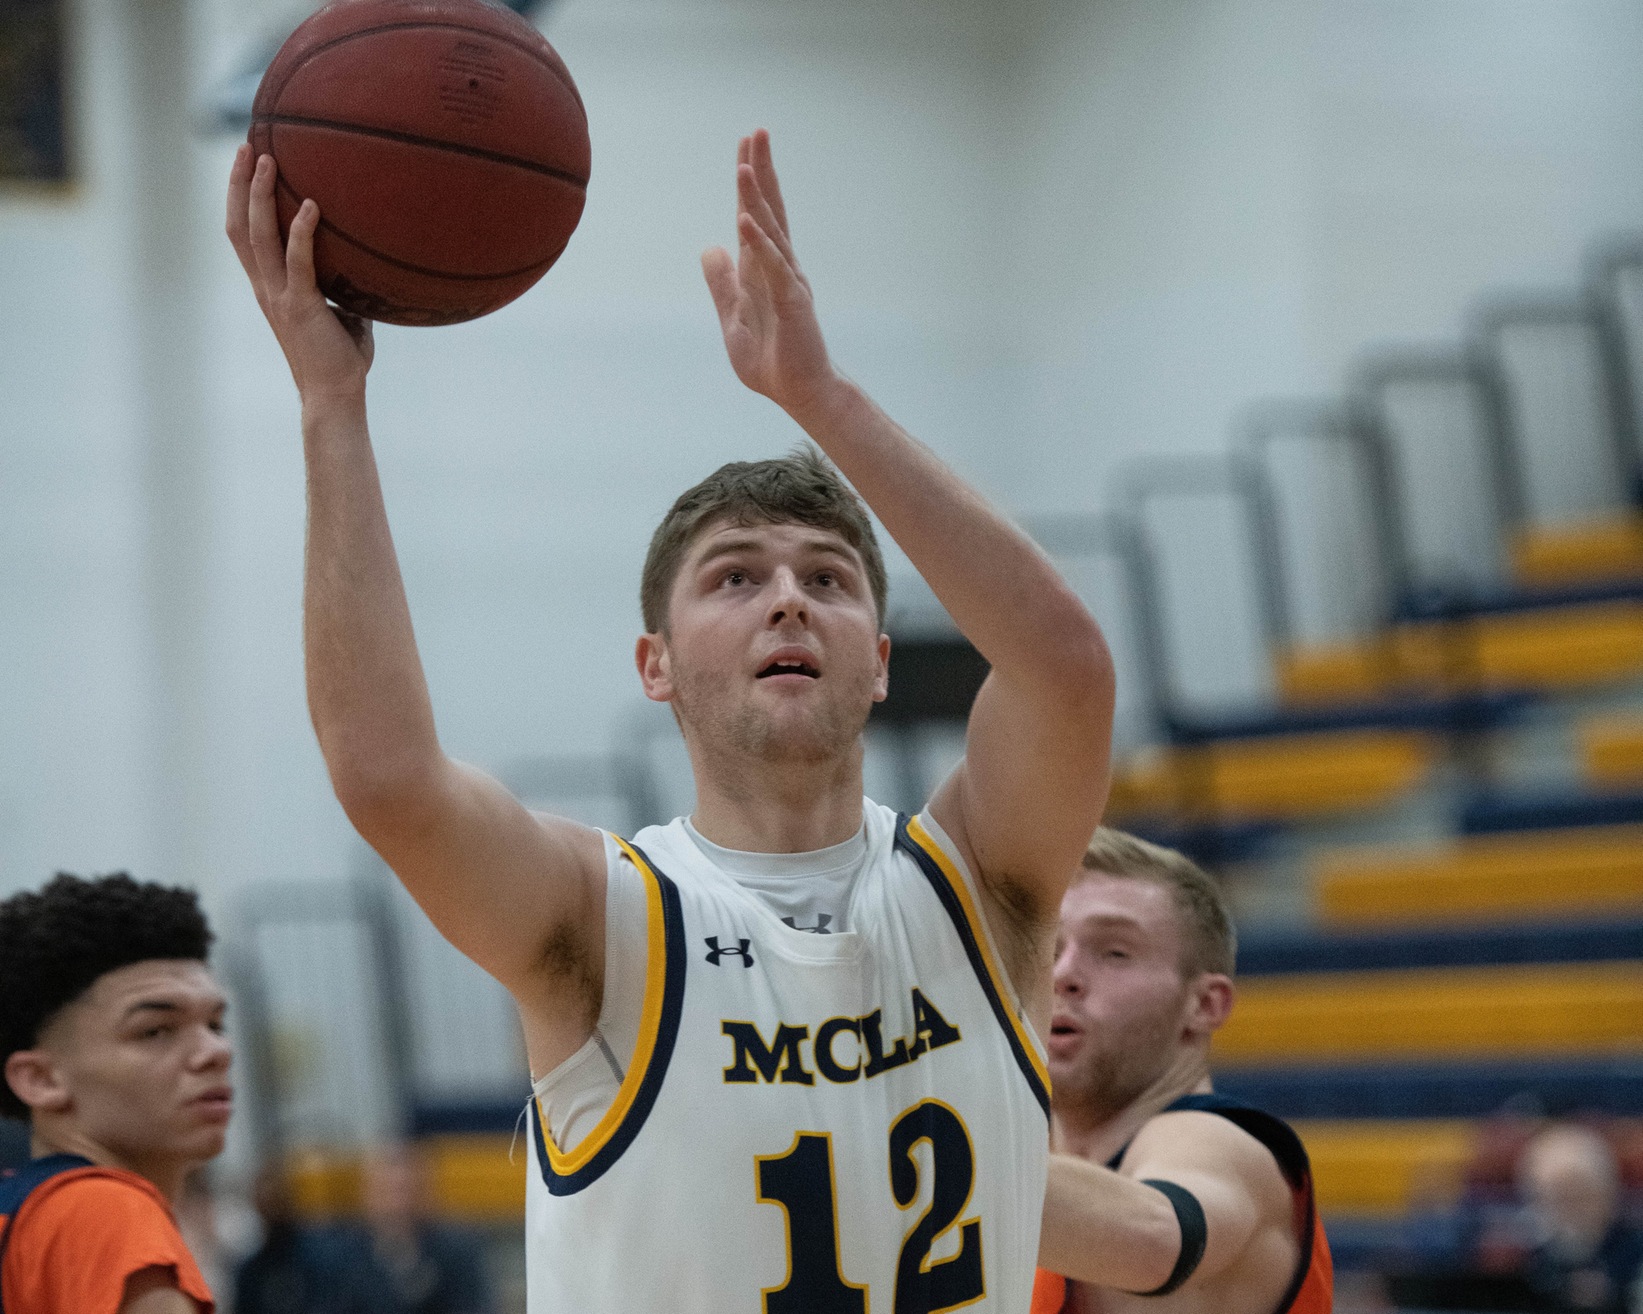 Demartinis,Trailblazers rally past Fitchburg 83-80 to stay atop MASCAC